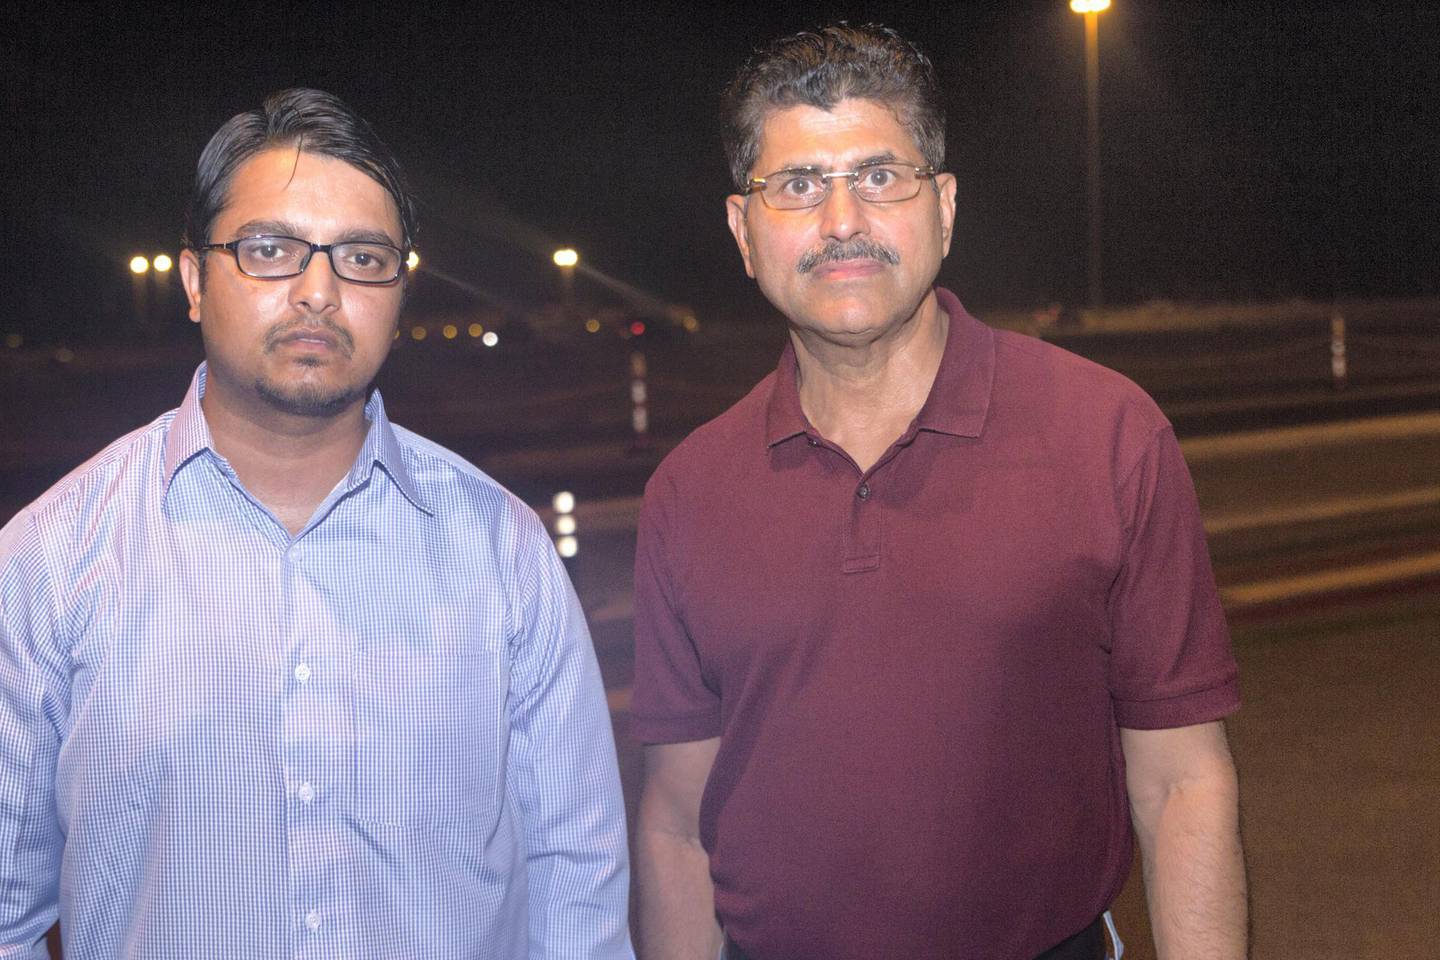 Dubai, UAE - August 01, 2017 - (L-R) Kamal Singh & Richard D'Souza represent a group of investors that have lost US$15 million in a real estate scam they were conned into - Navin Khianey for The National